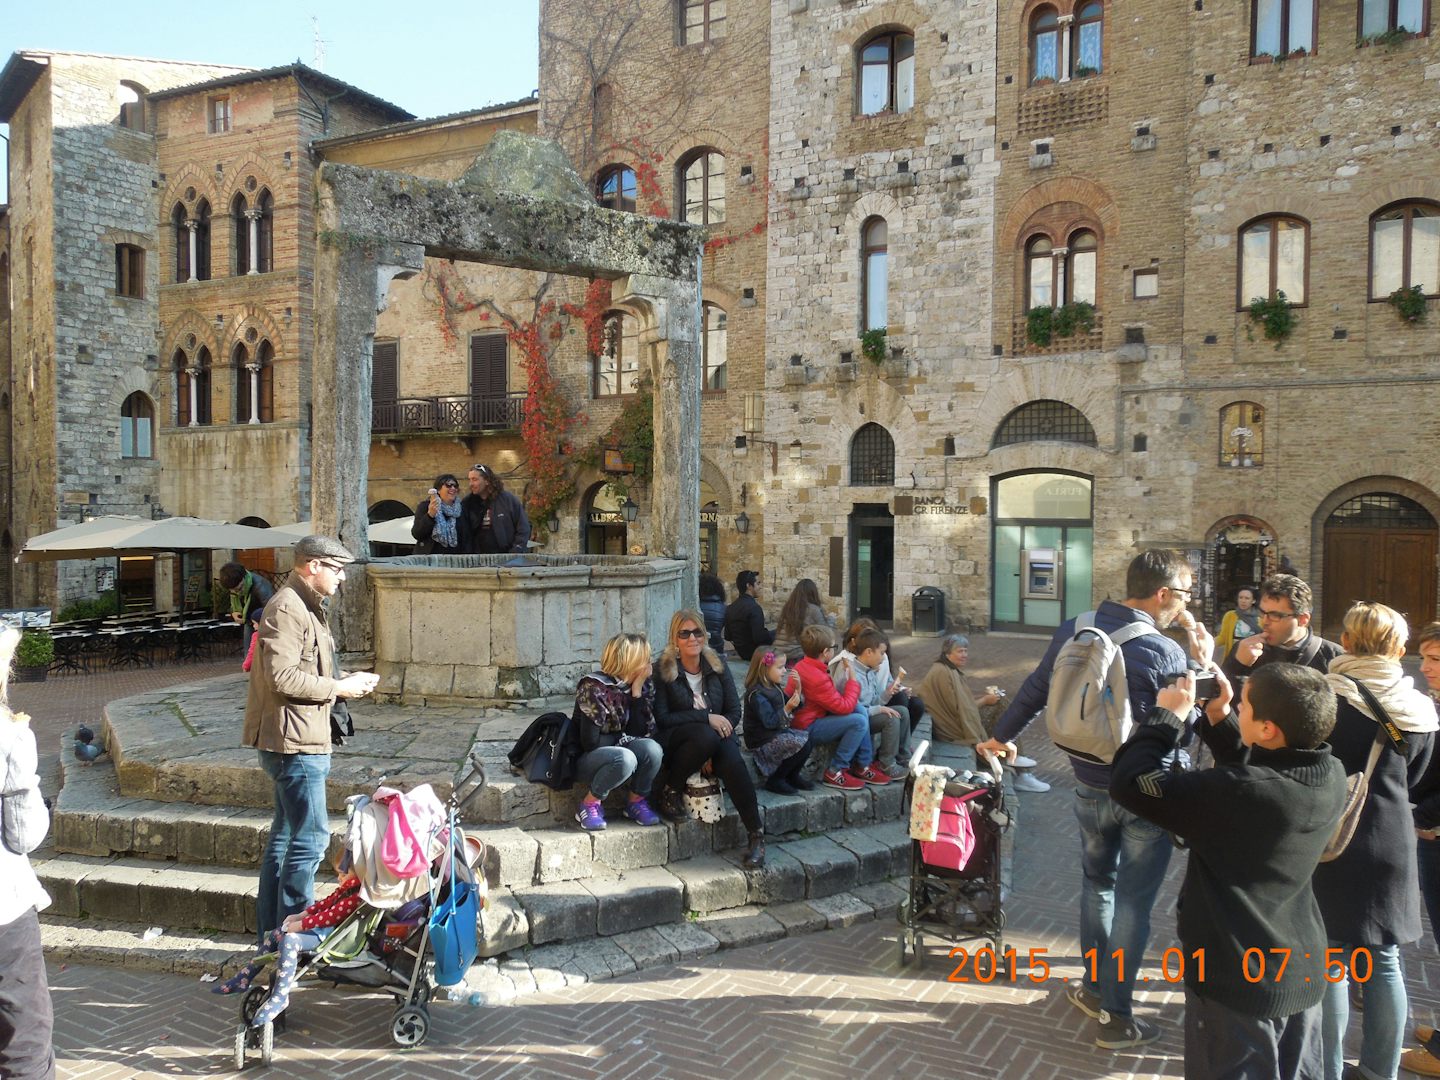 San Gimignani town square and fountain